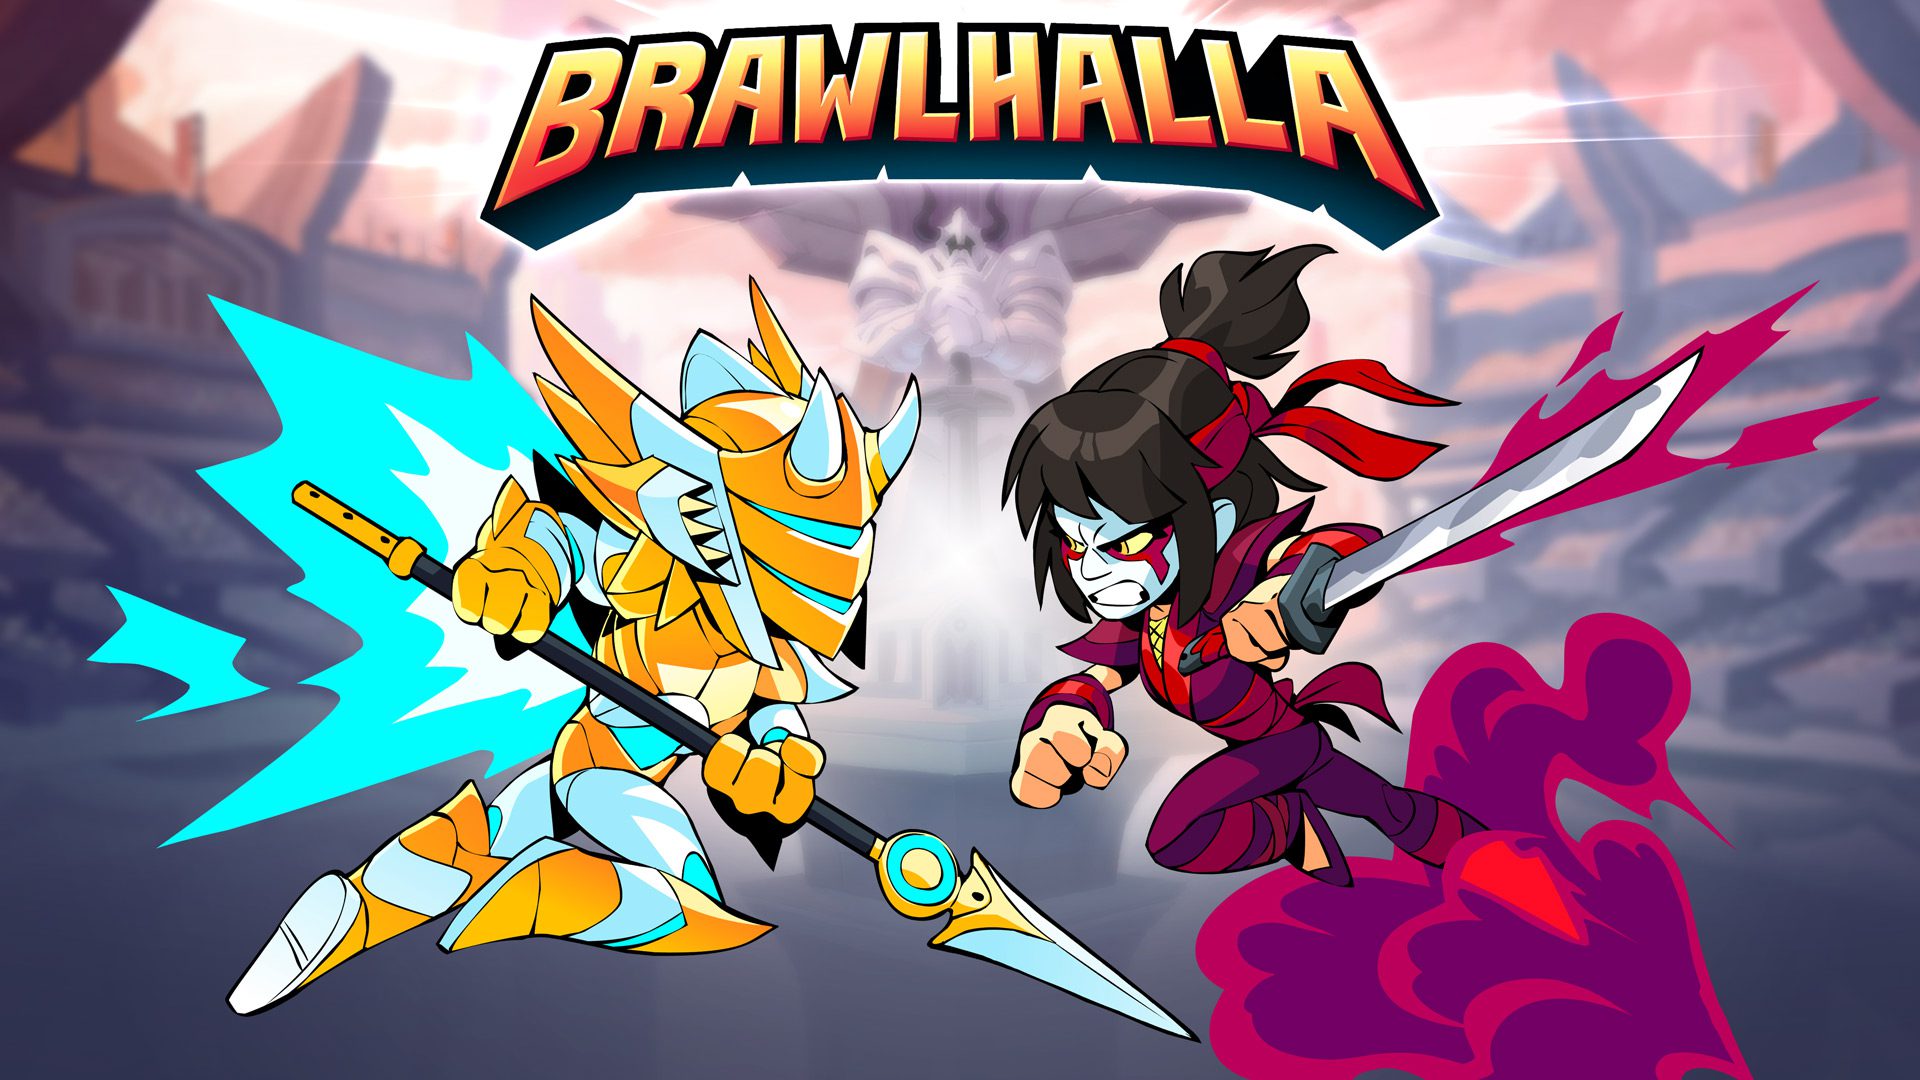 Brawlhalla has launched on mobiles